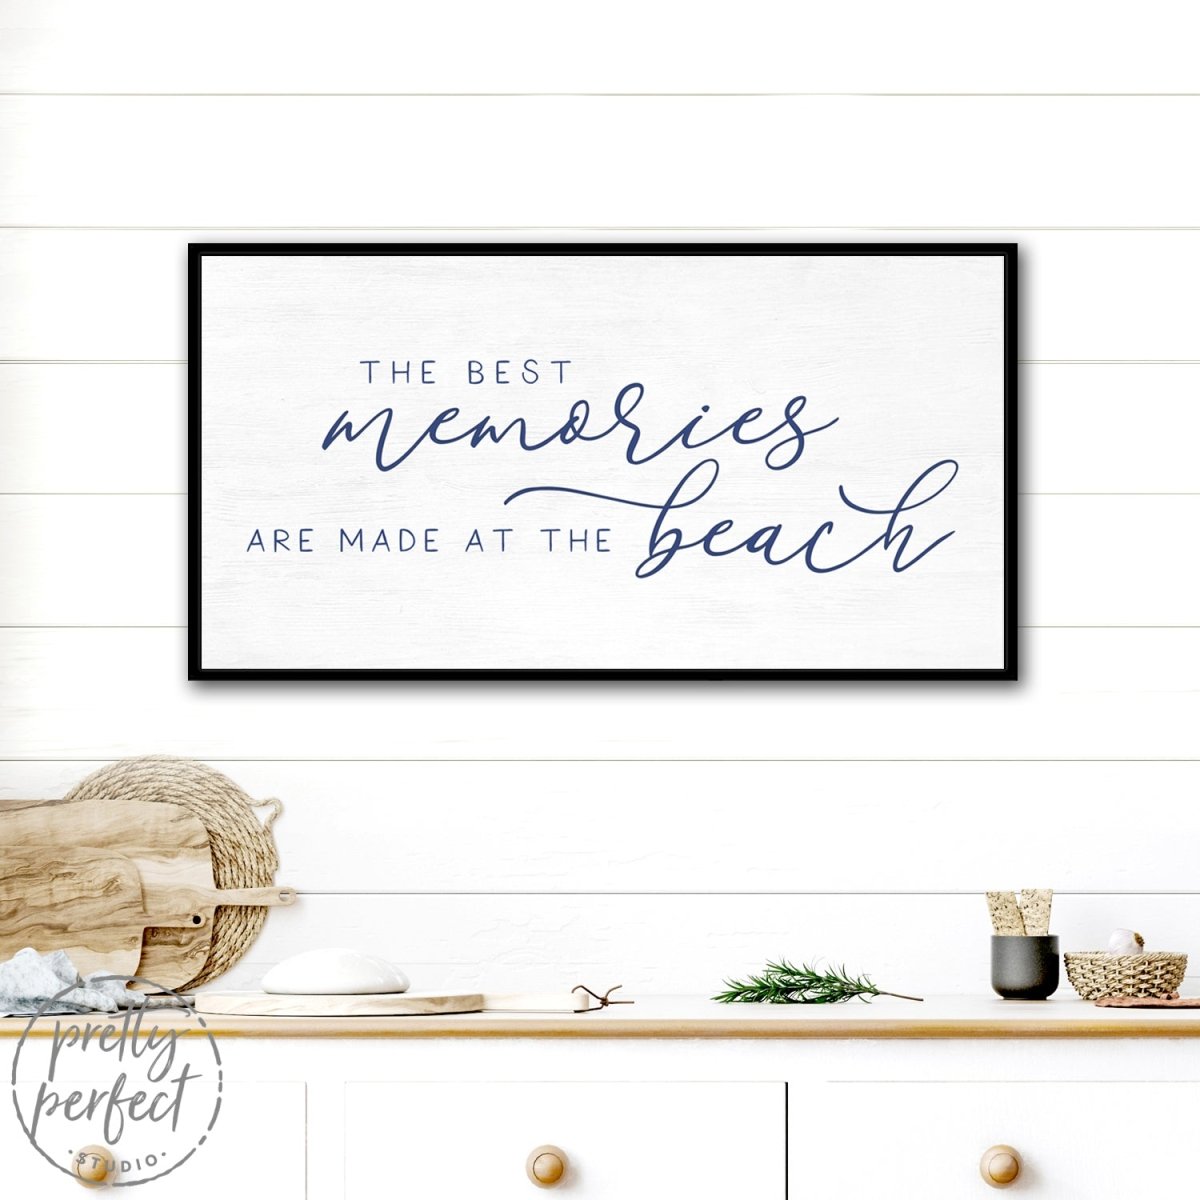 The Best Memories Are Made At The Beach Sign on Wall Above Shelf - Pretty Perfect Studio